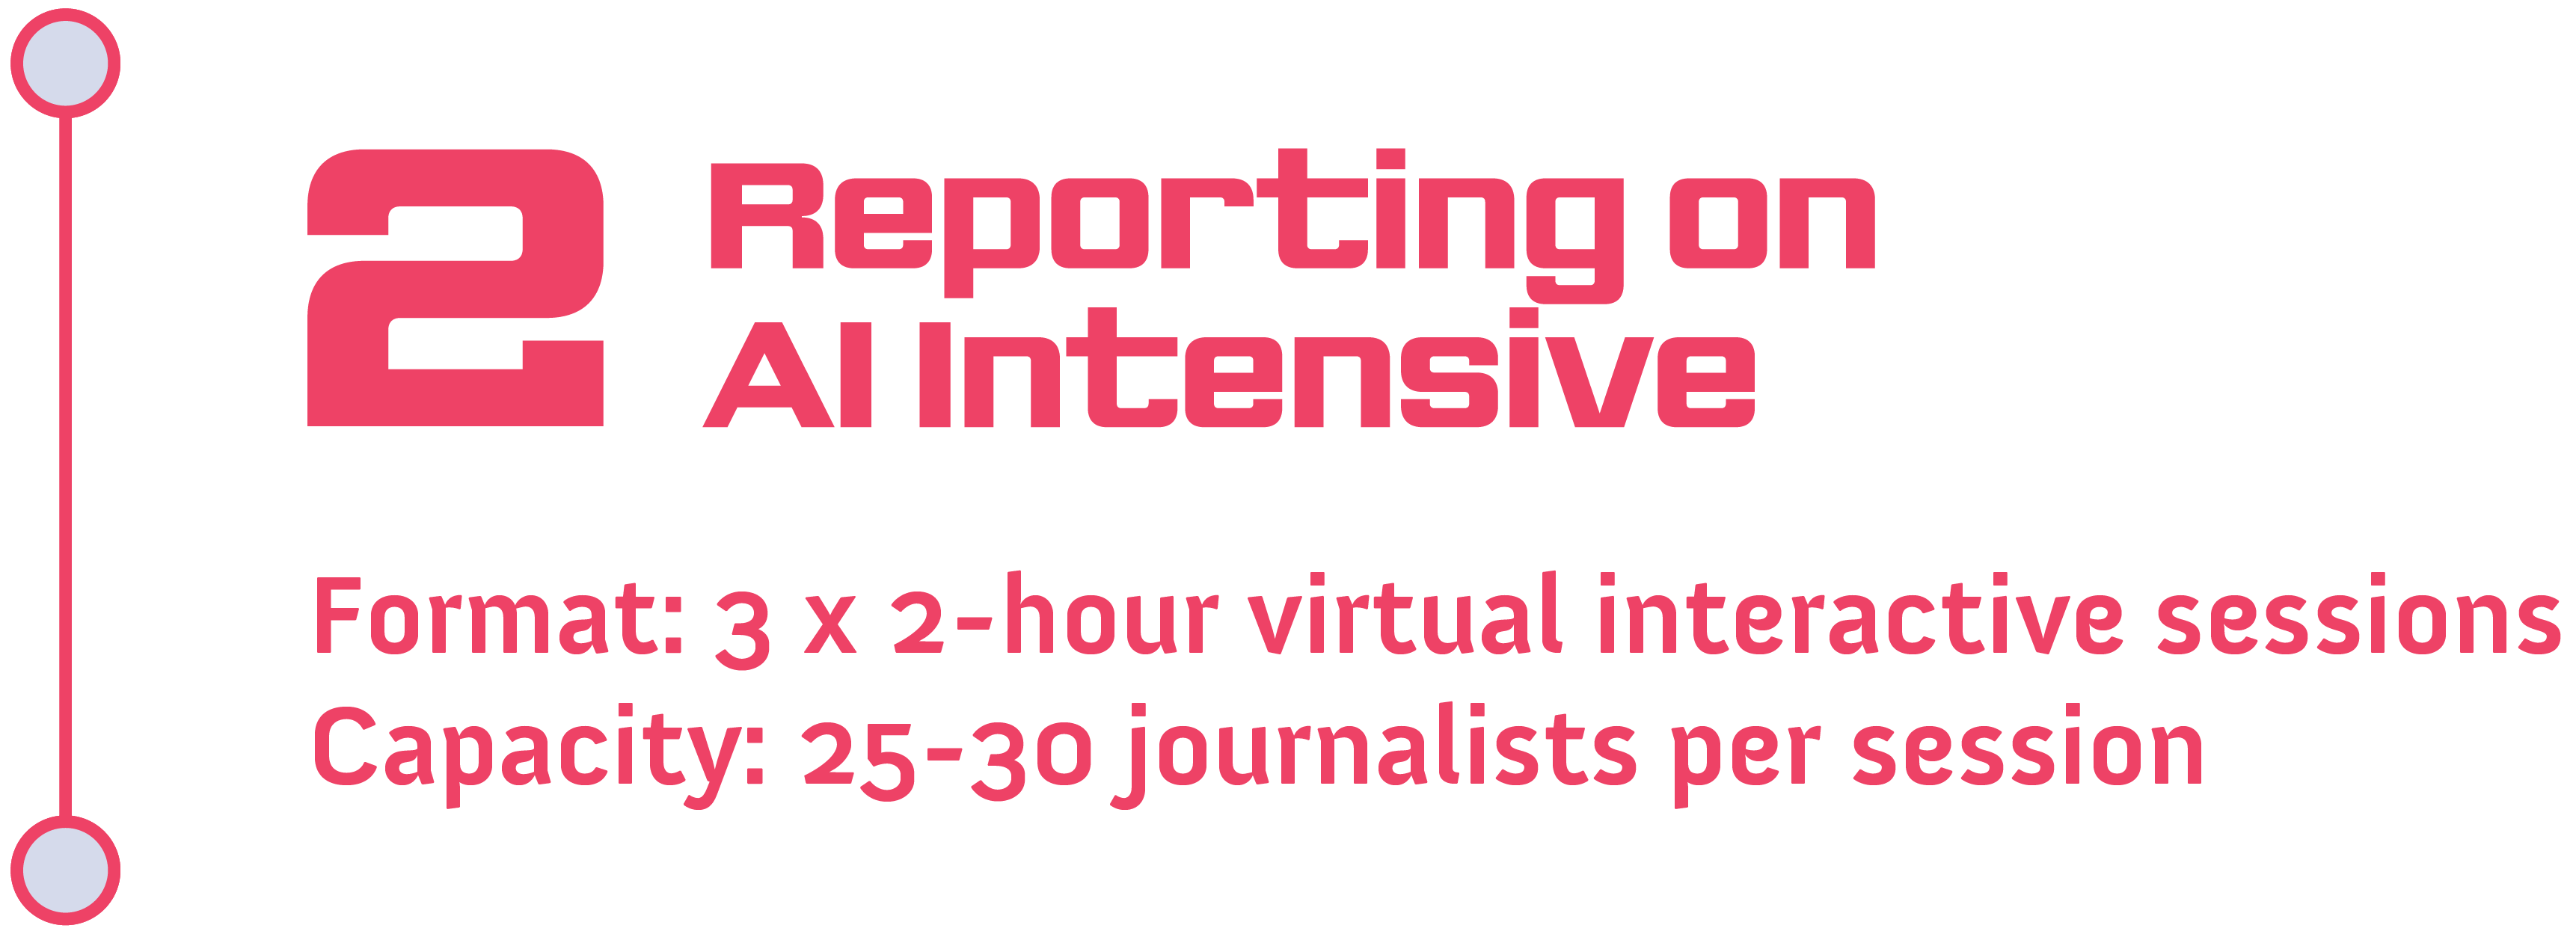 Track 2: Reporting on AI Intensive<br />
Format: 3x2-hour virtual interactive sessions<br />
Capacity: 25-30 journalists per session